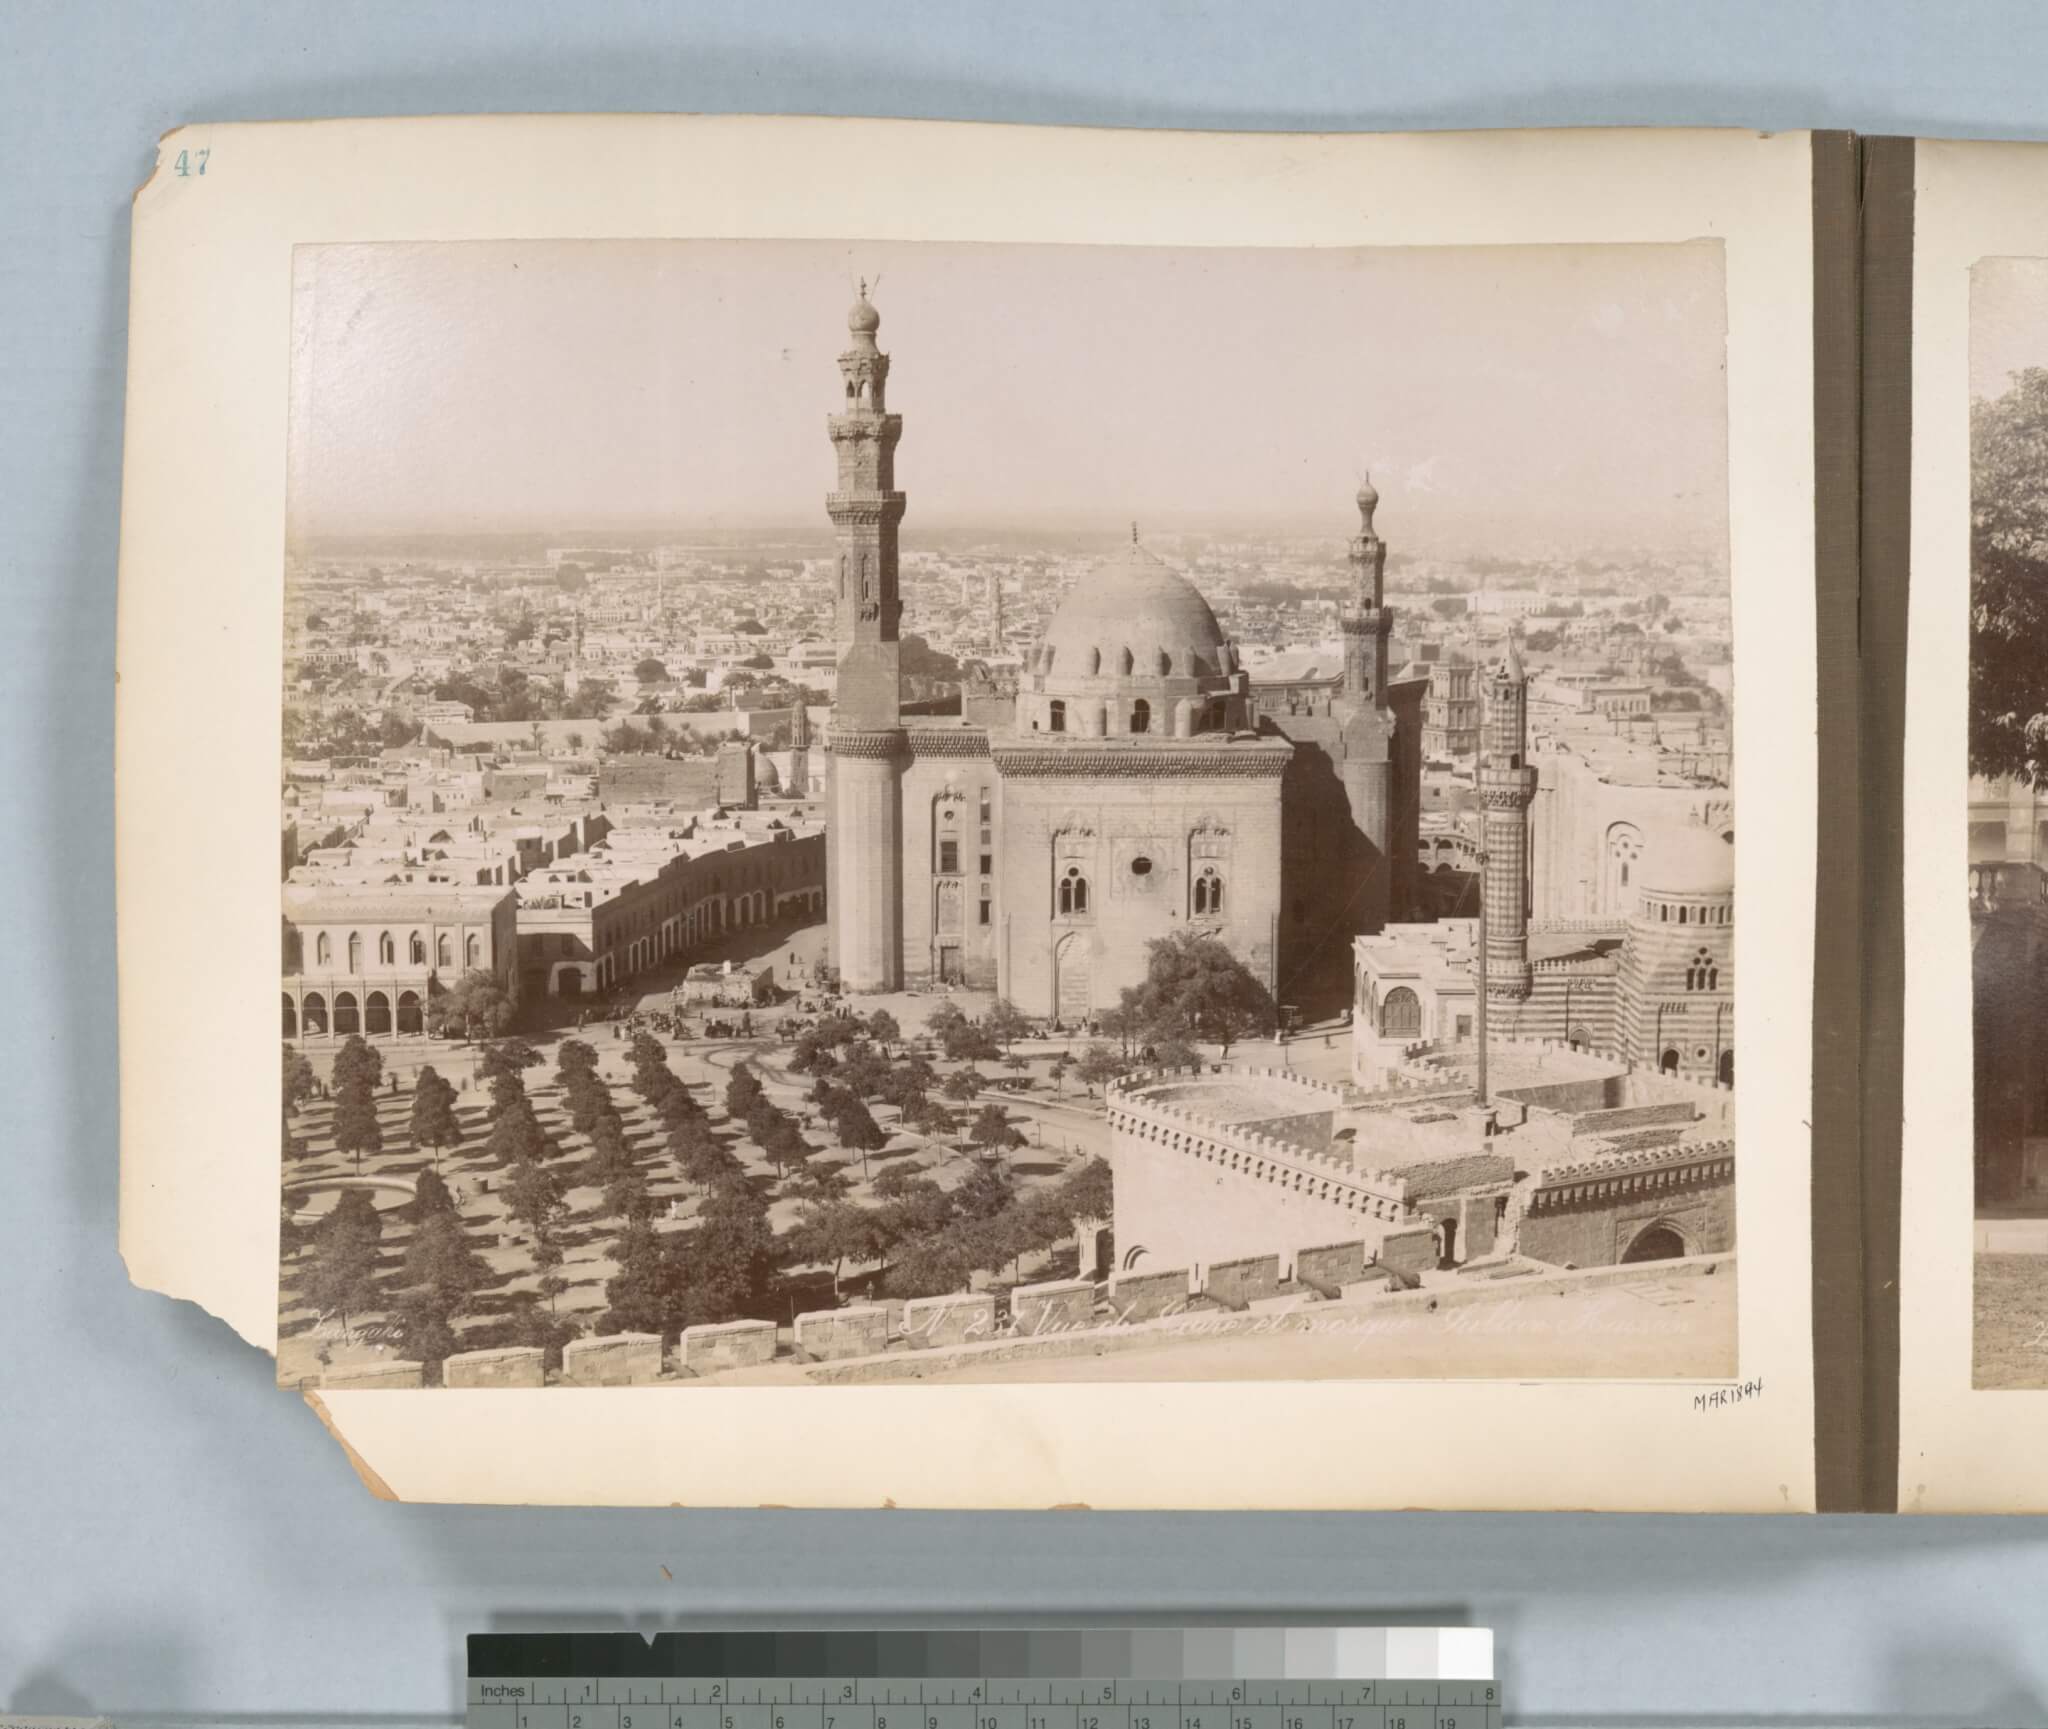 Archival image of the Sultan Hassan Mosque 